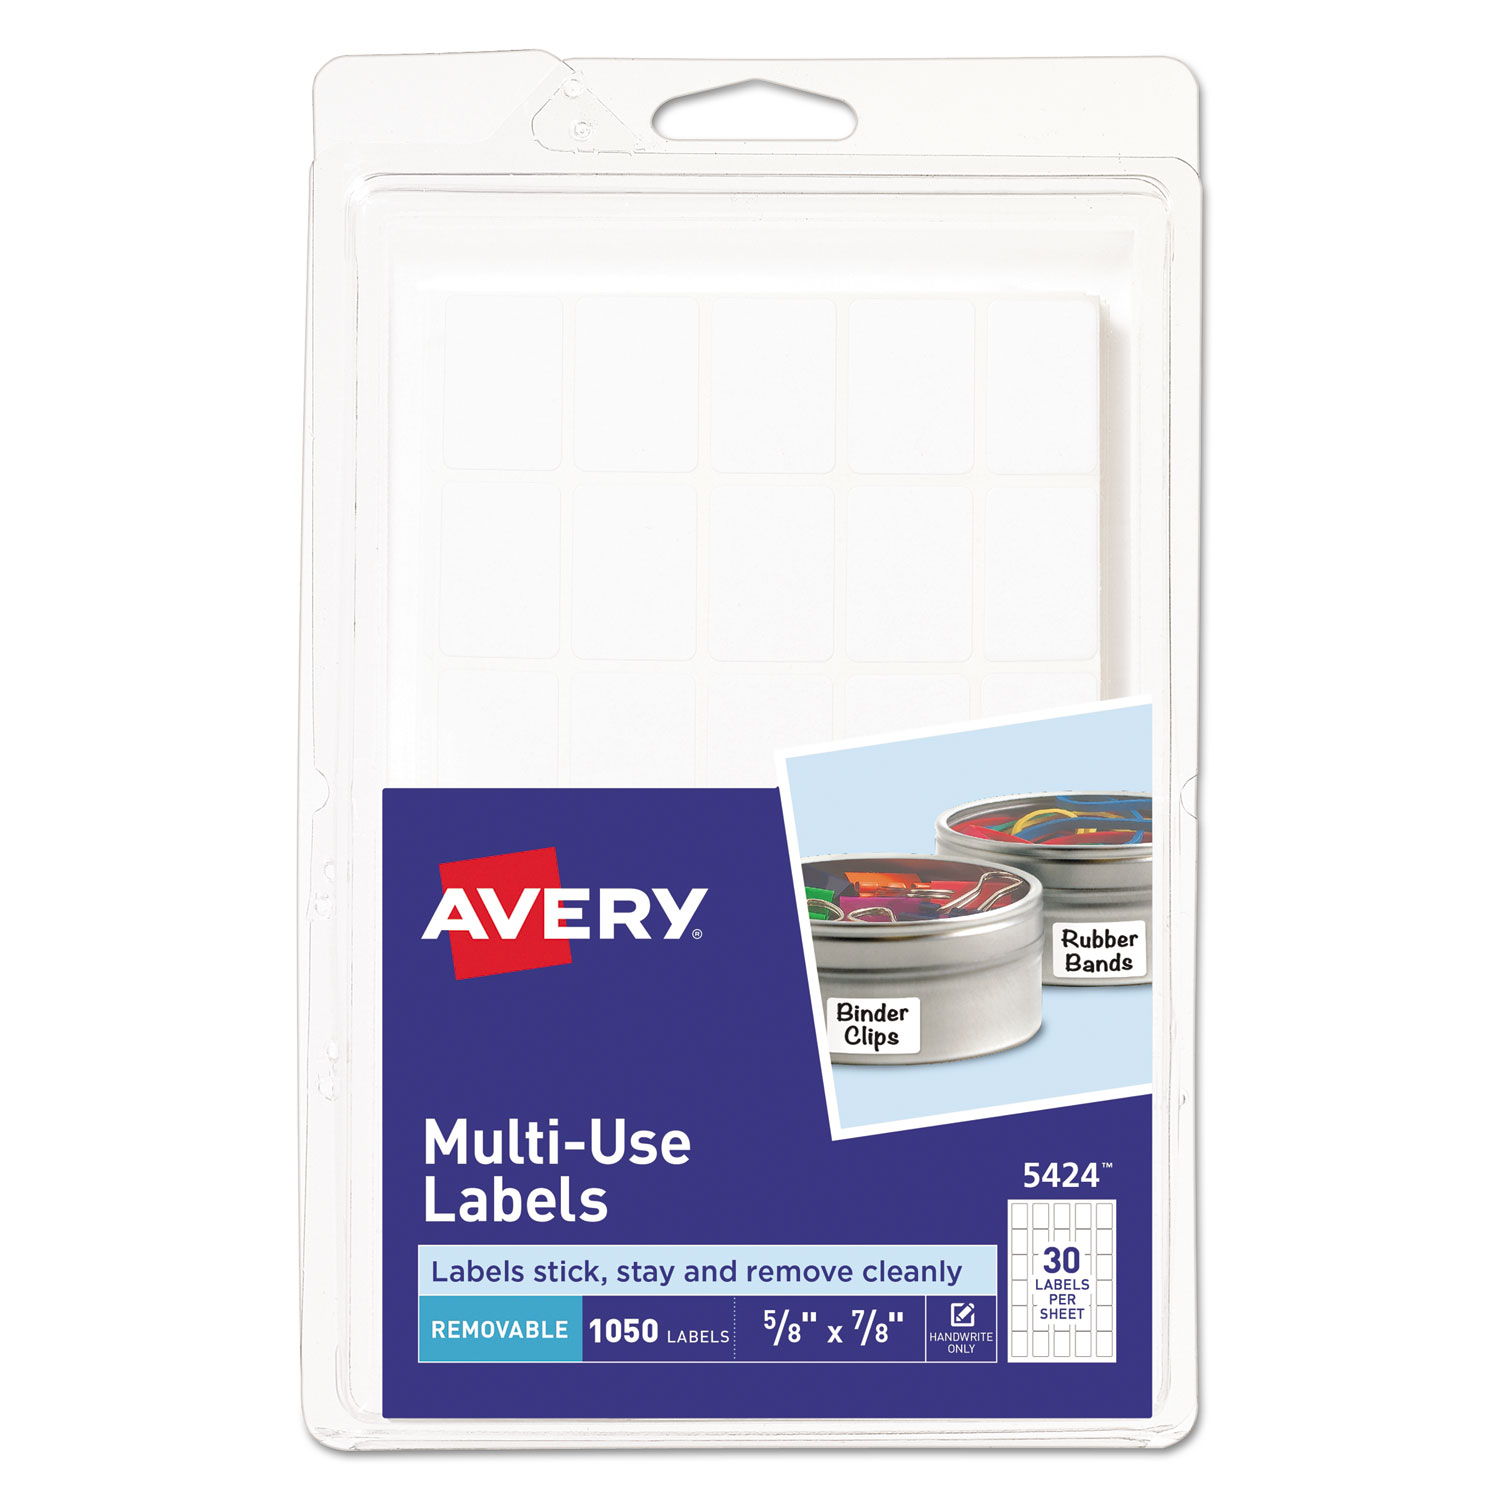  Avery 05424 Removable Multi-Use Labels, Handwrite Only, 0.63 x 0.88, White, 30/Sheet, 35 Sheets/Pack (AVE05424) 